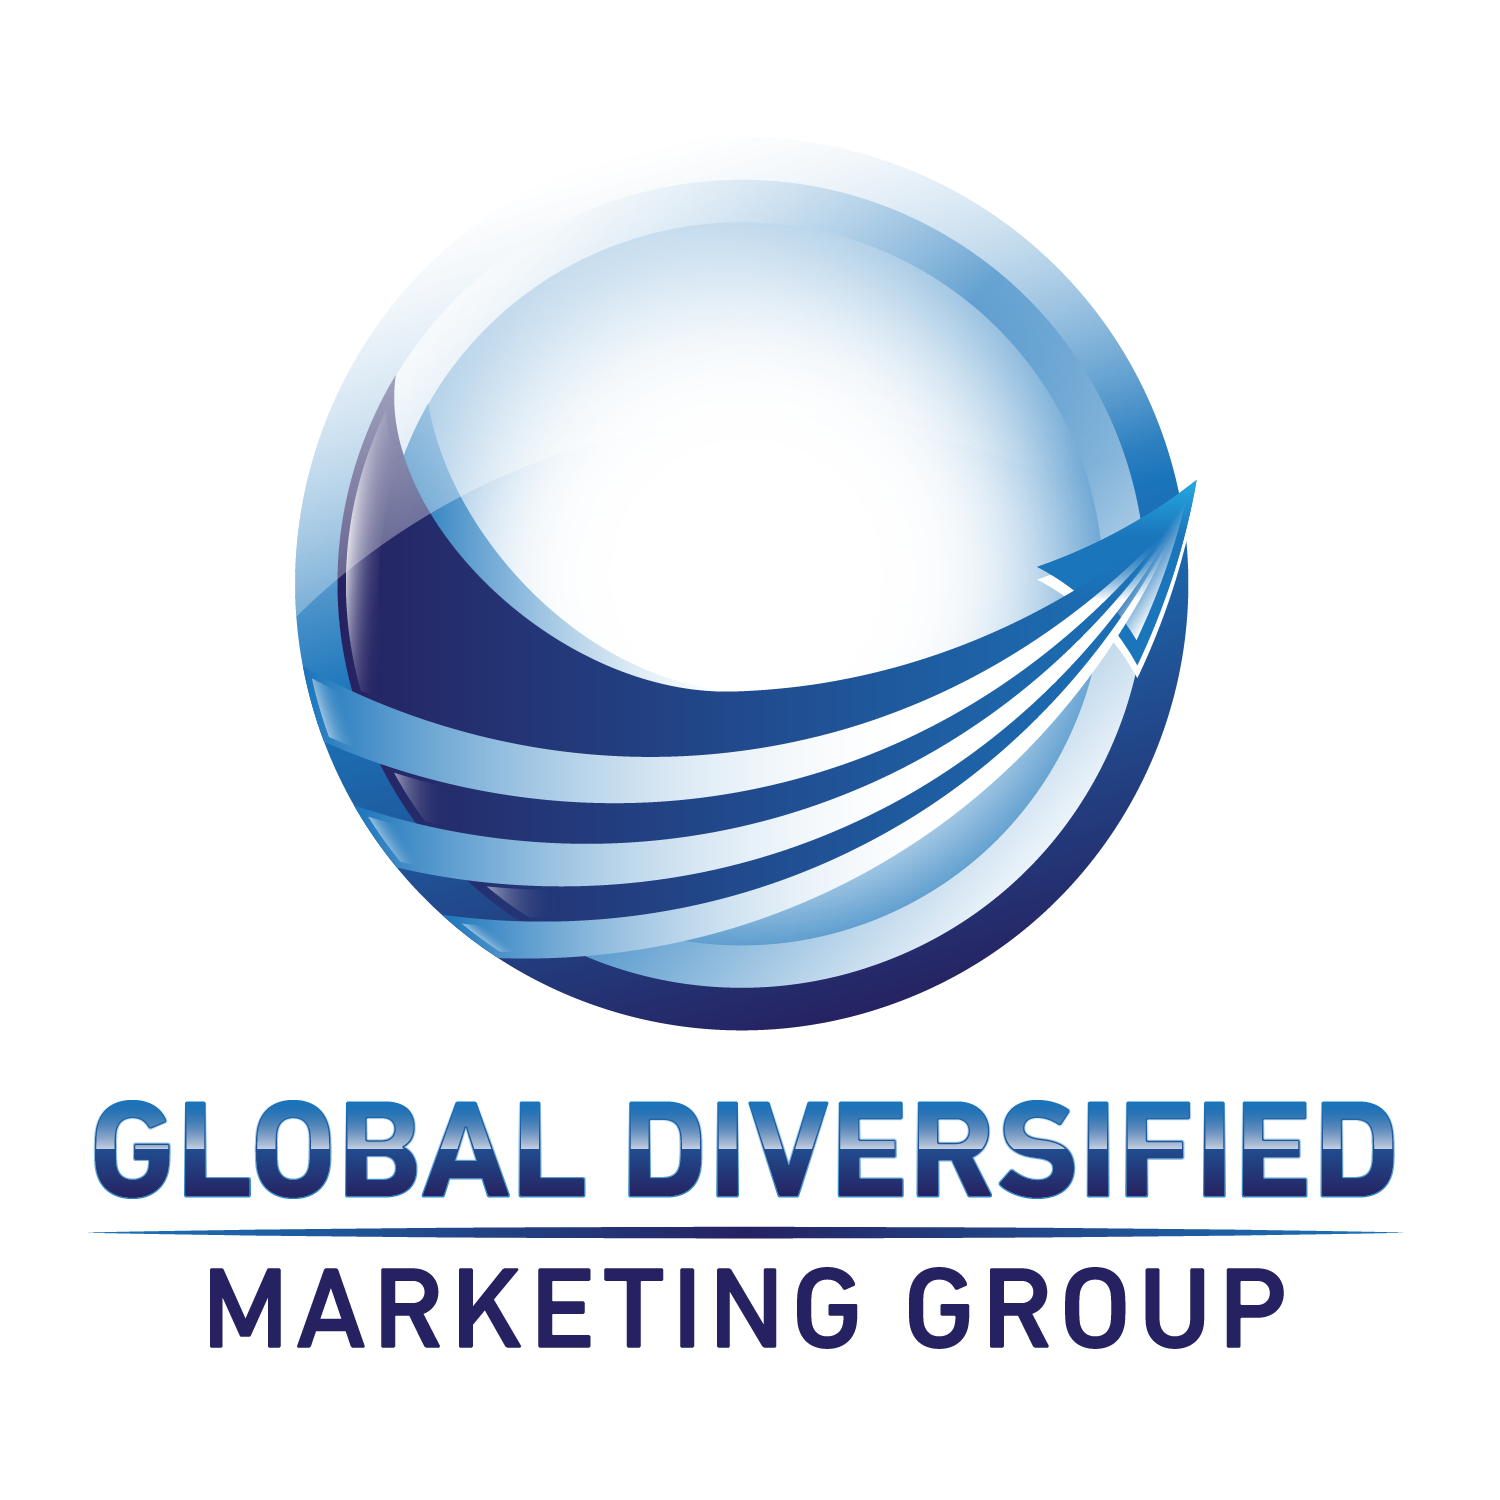 Global Diversified Marketing Group Welcomes Donovan McNabb to Ezlyv Family